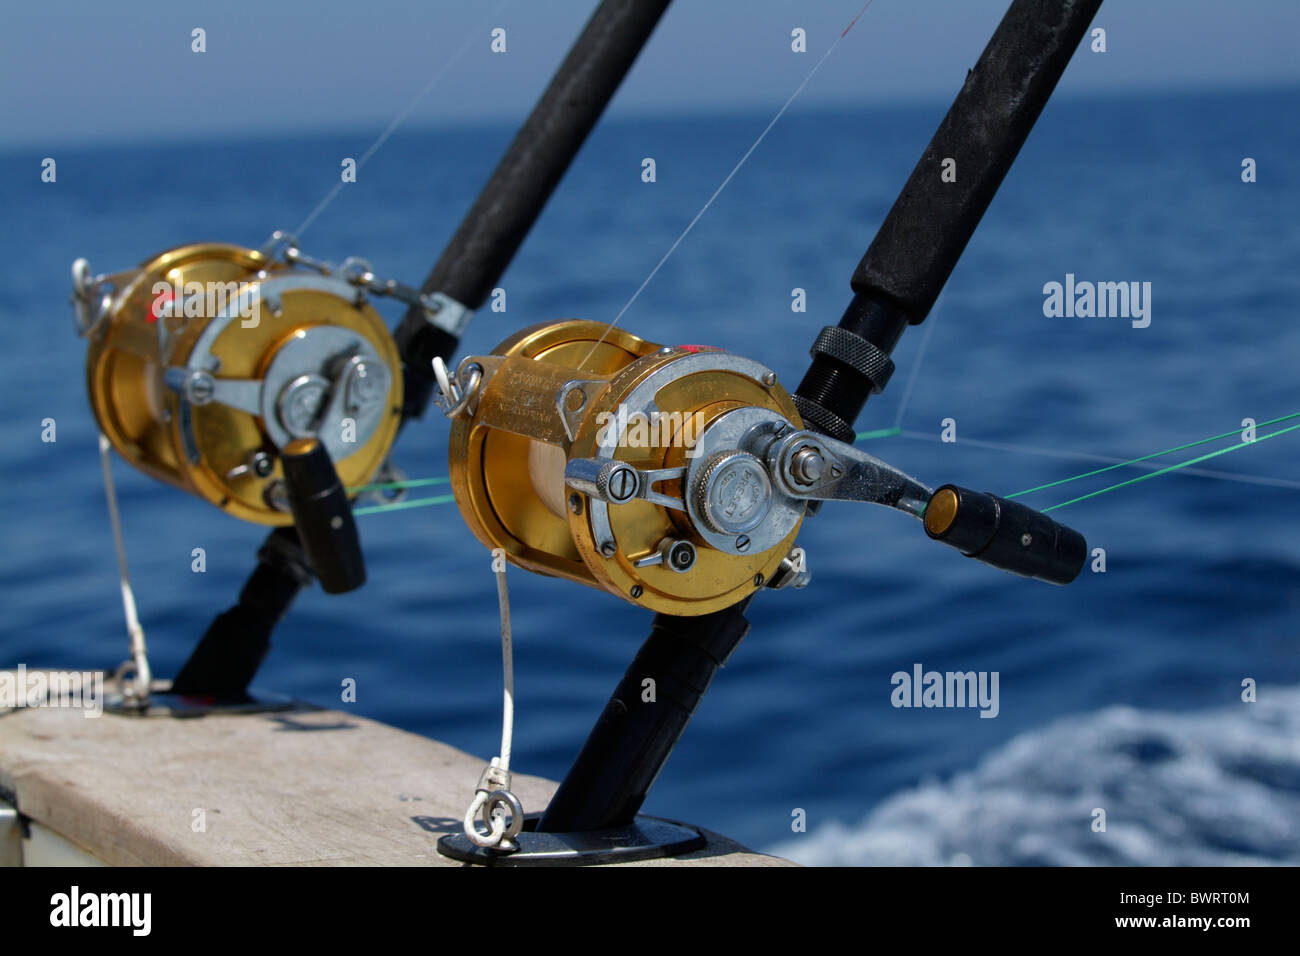 Two fishing rods and reels on board a game fishing boat in the